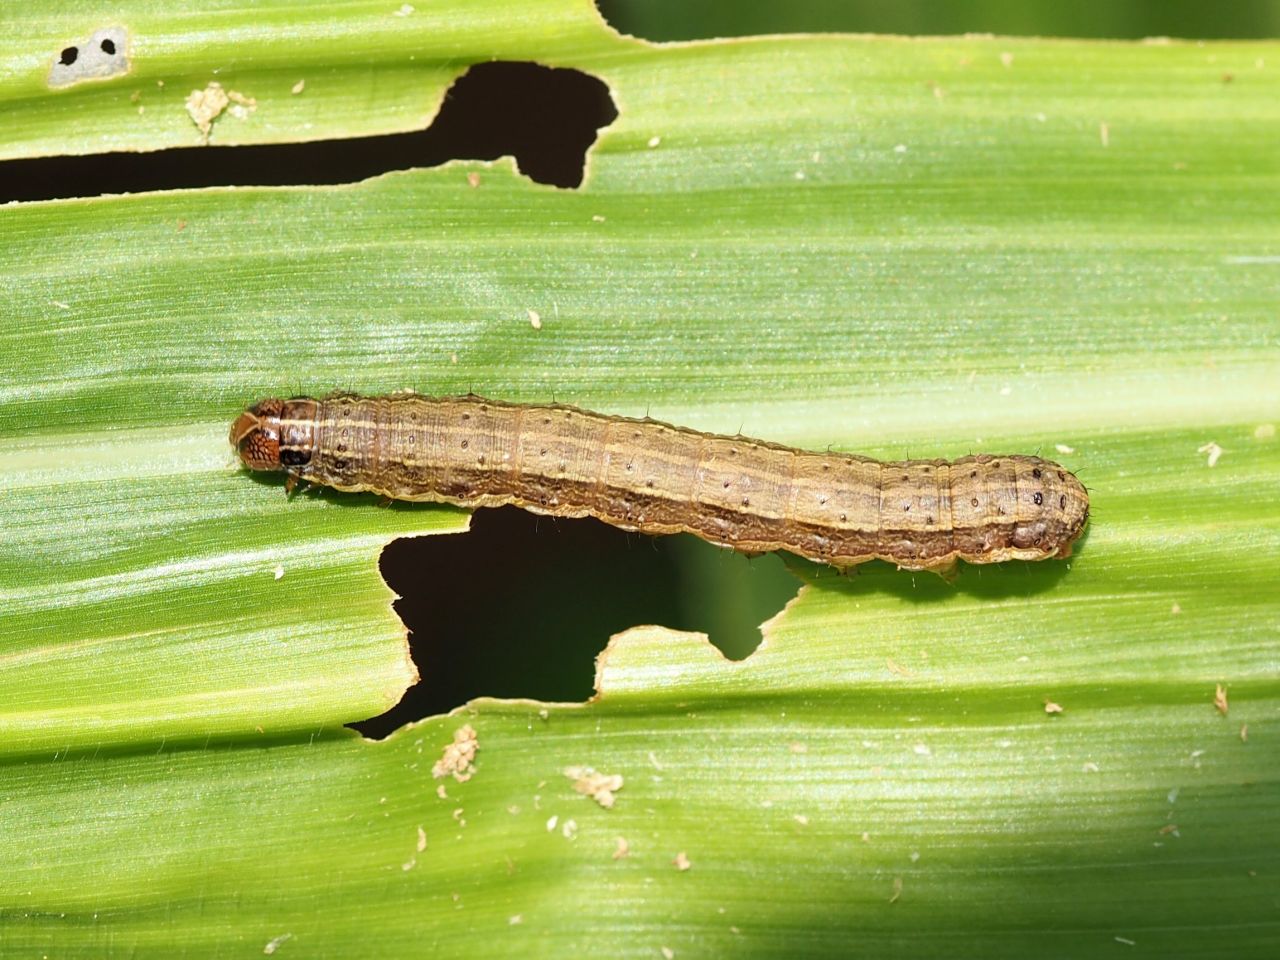 The fall armyworm moth is among the most notorious pests in the Americas and it has recently invaded southern Africa. <br /><br />In its larval stage, the rapacious pest has been compared to the locust for its devastating impact on crops. It also breeds rapidly and is difficult to detect. 